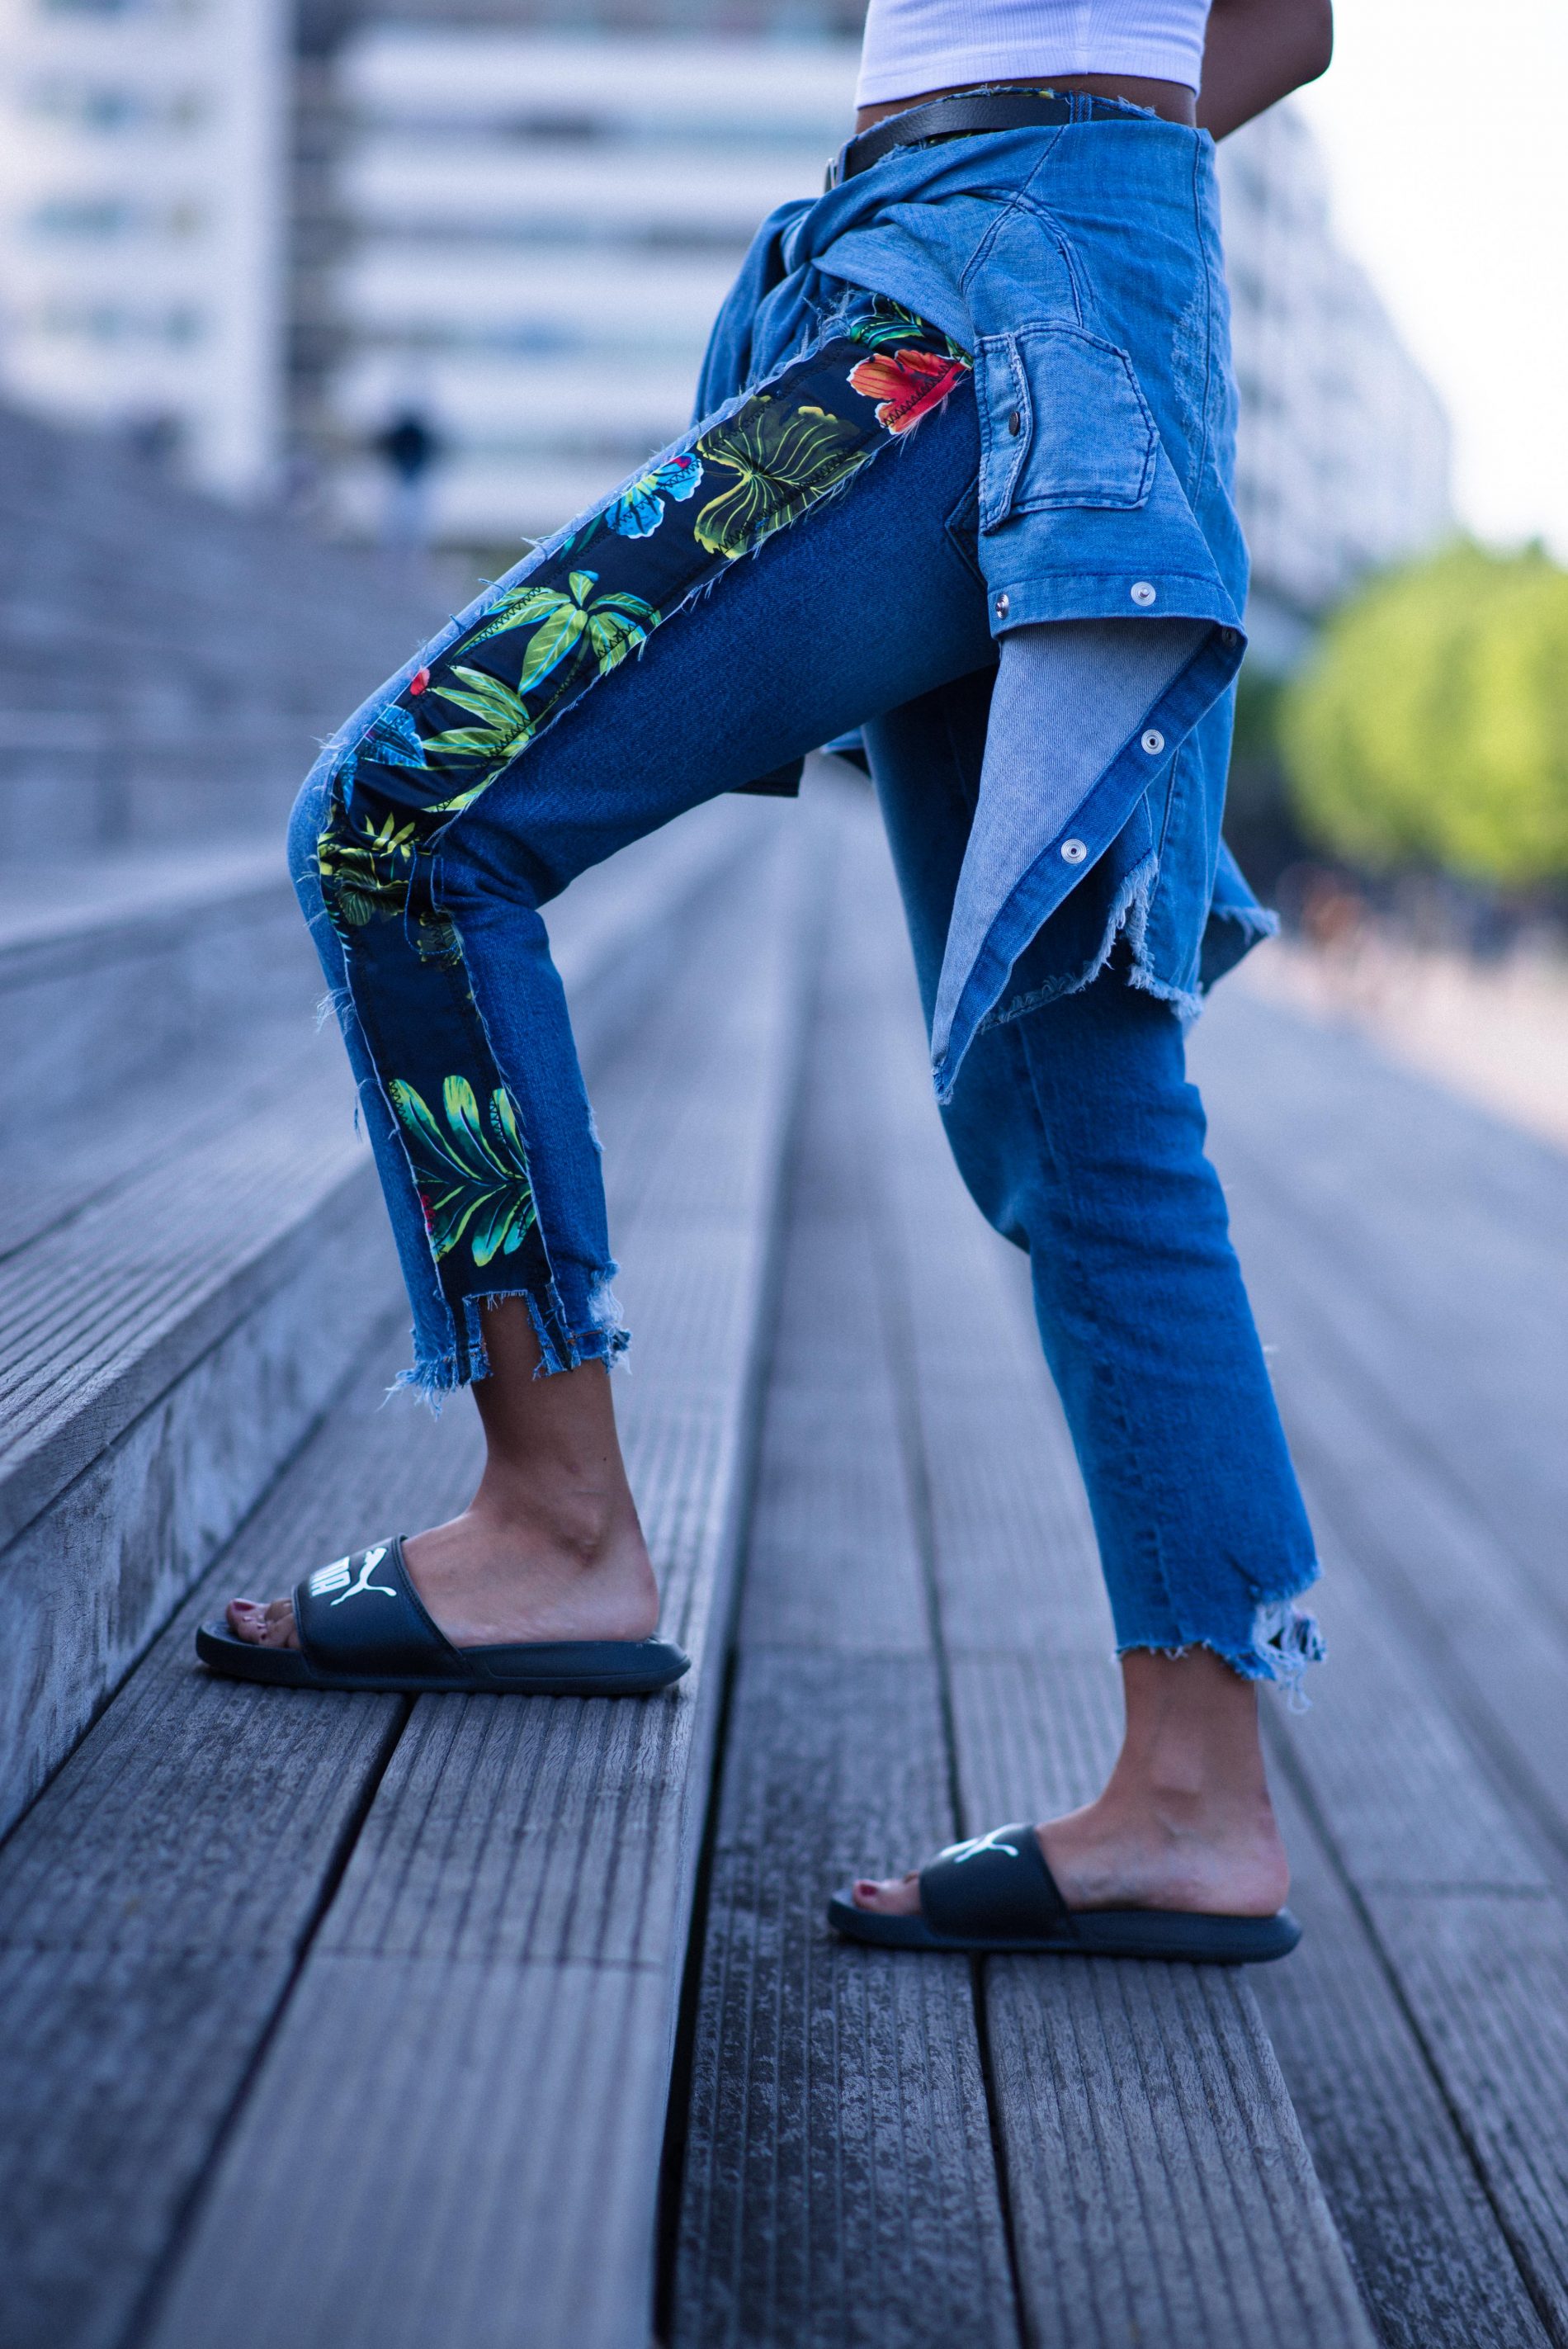 Outfits with flip flops and jeans in summer - how to wear it? | Lindsay ...